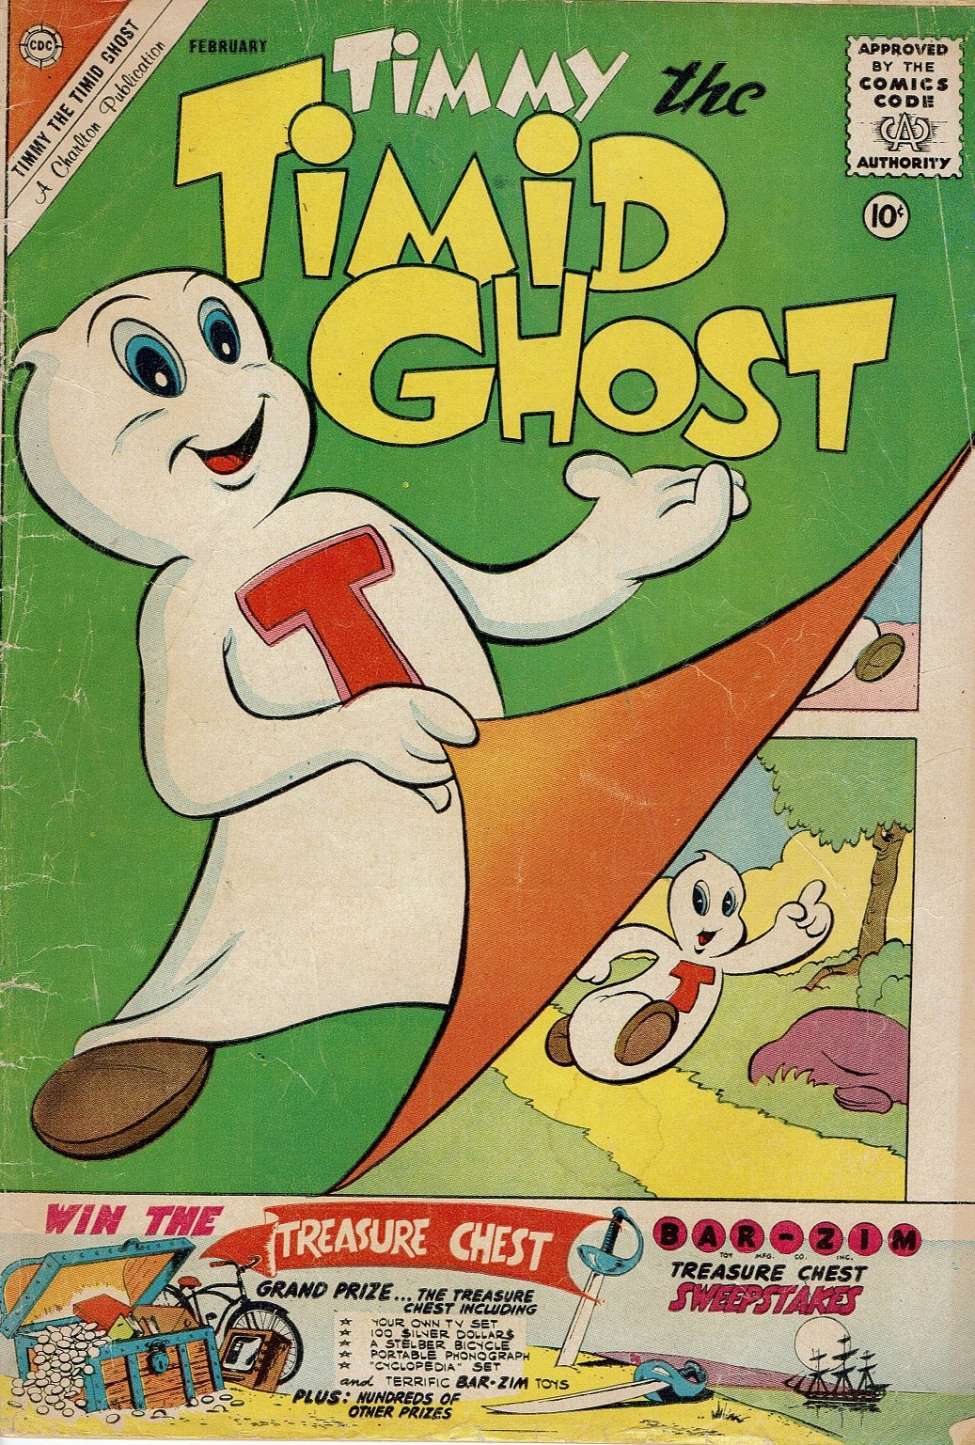 Book Cover For Timmy the Timid Ghost 25